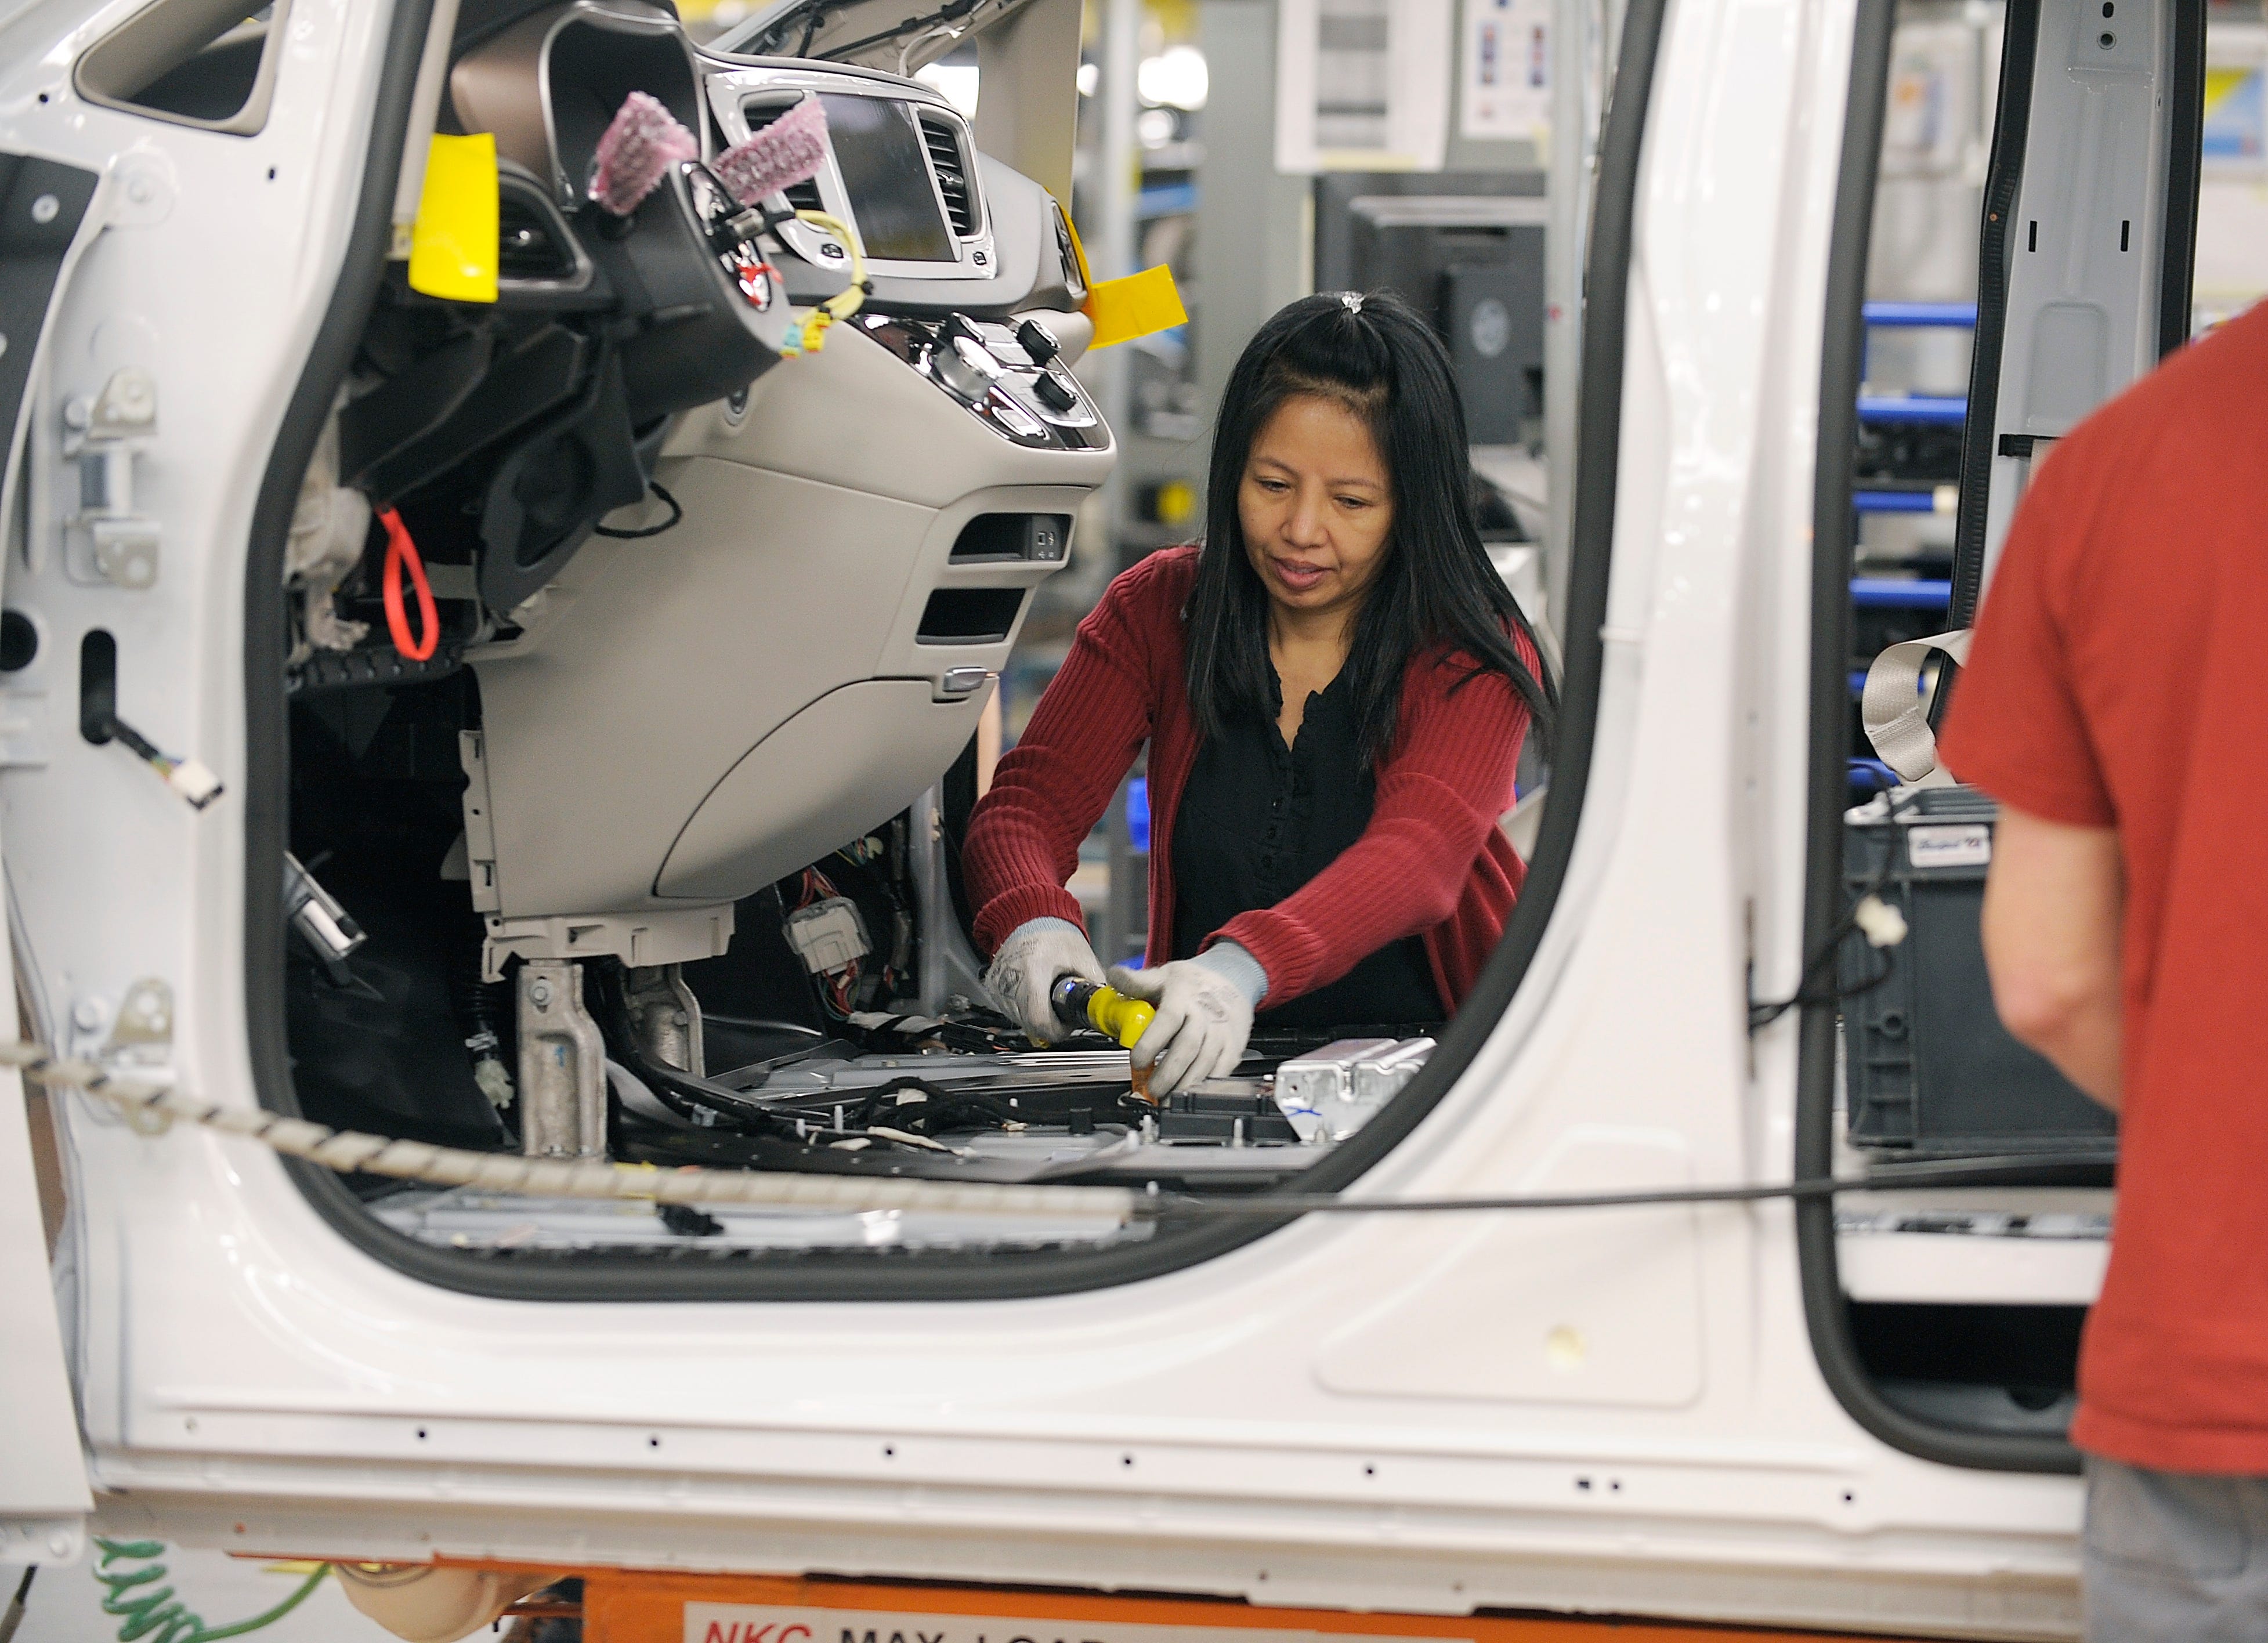 About 1,500 workers on the third shift at Fiat Chrysler Automobiles' Windsor Assembly Plant will have jobs through the first three months of the year.